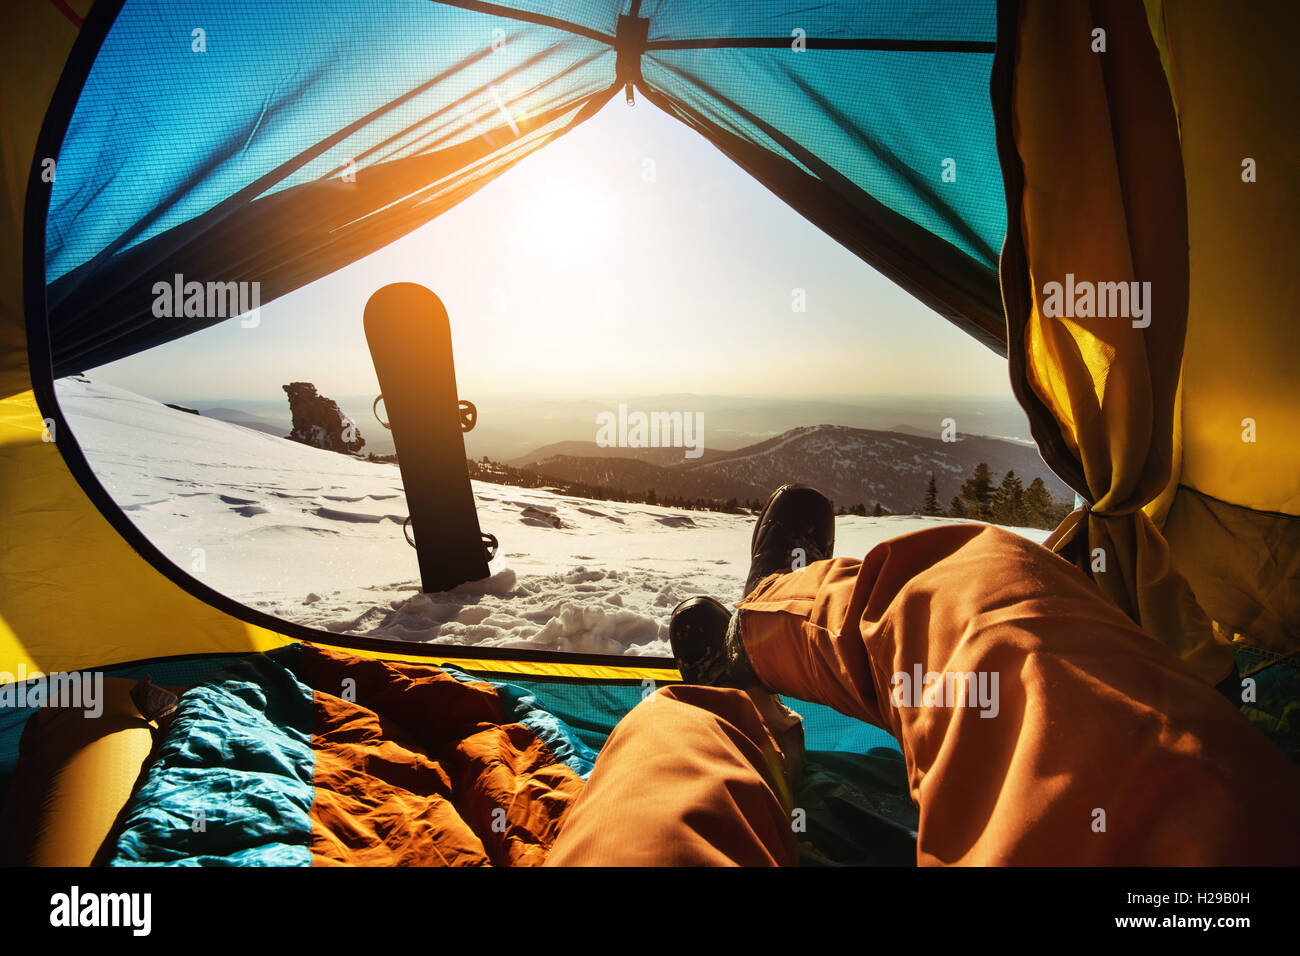 Snowboarder relaxing in tent on background of sunset Stock Photo